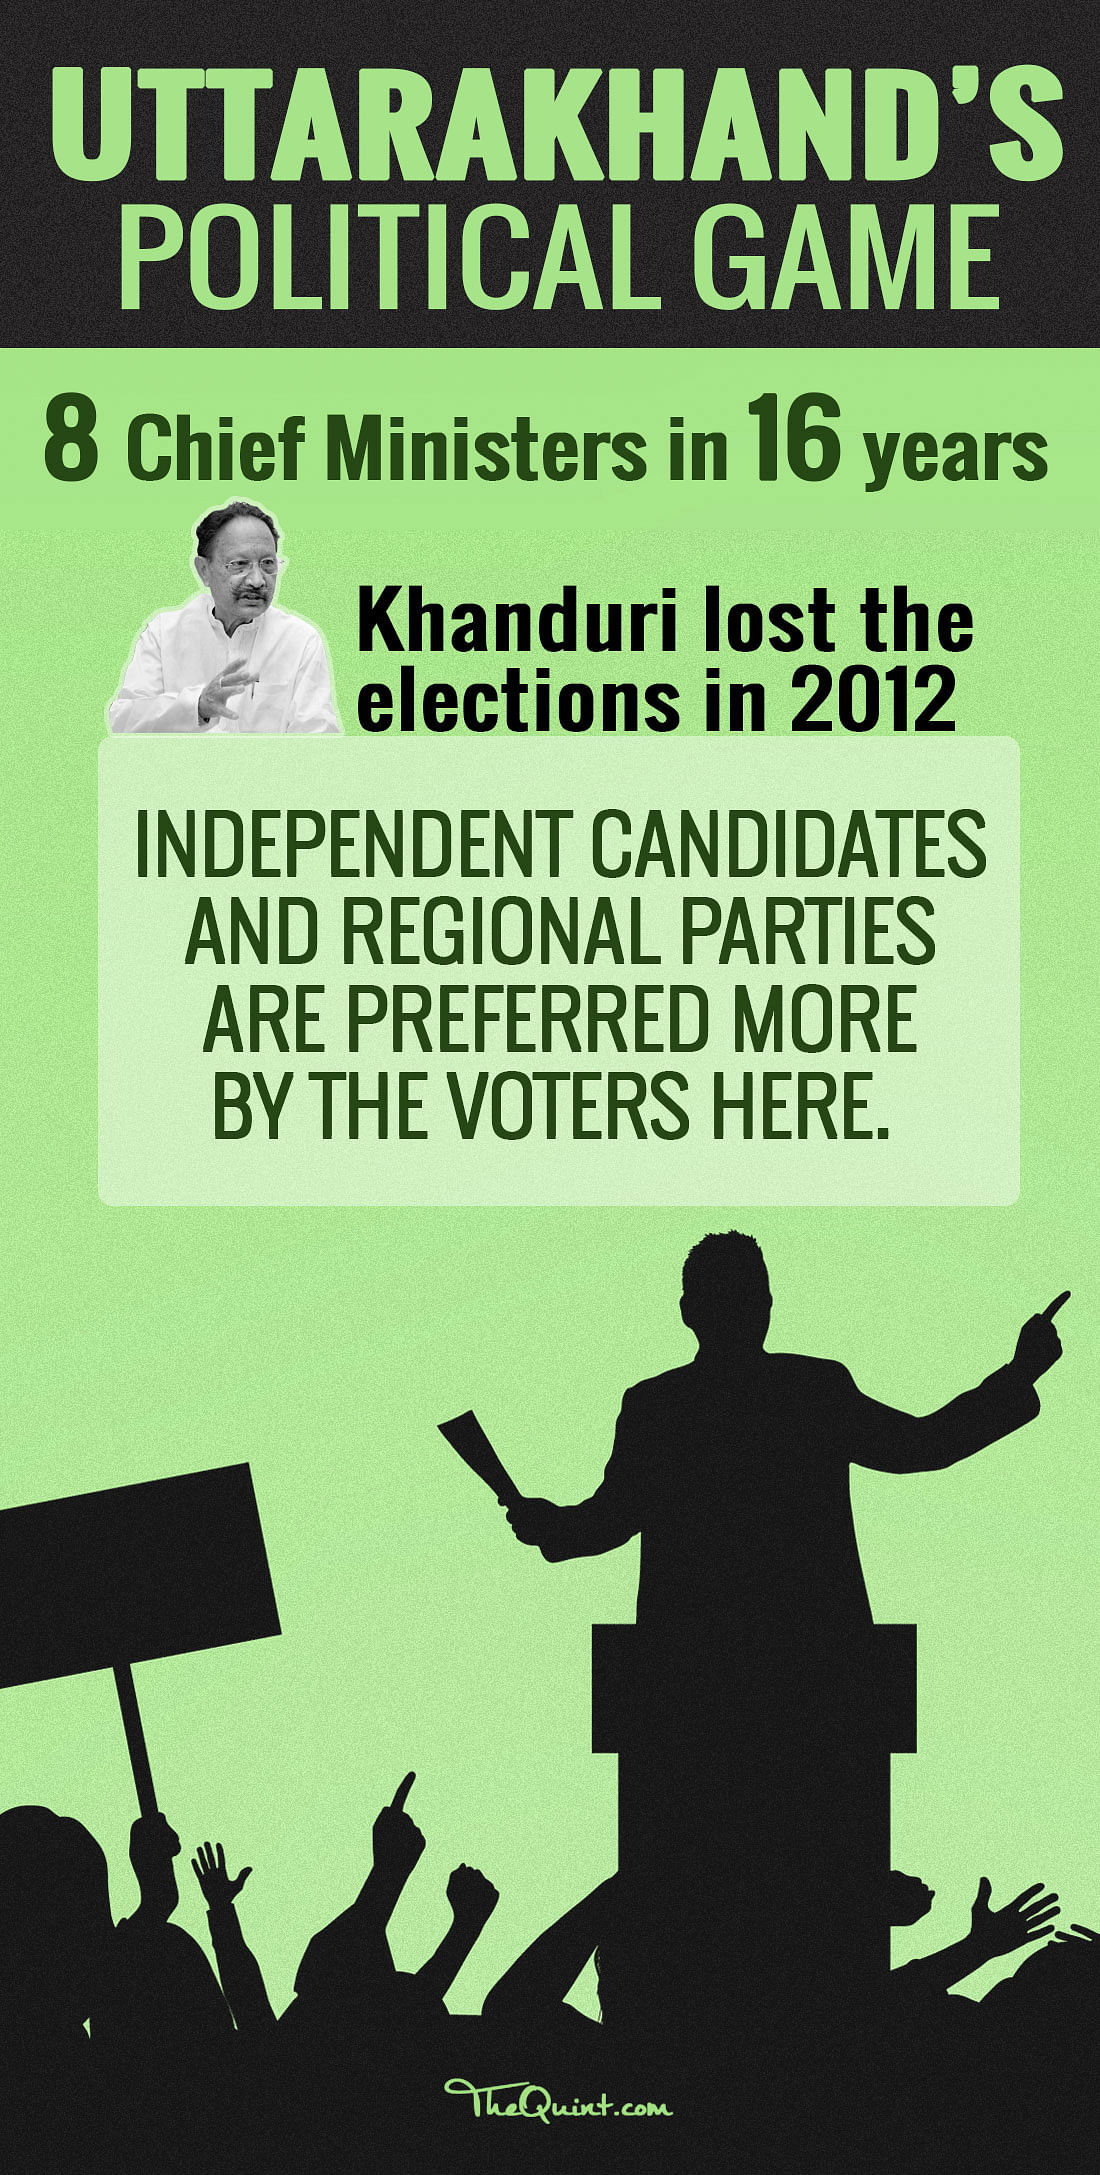 As Uttarakhand goes to polls on 15 February, here’s a wrap up of all you need to know about the state.